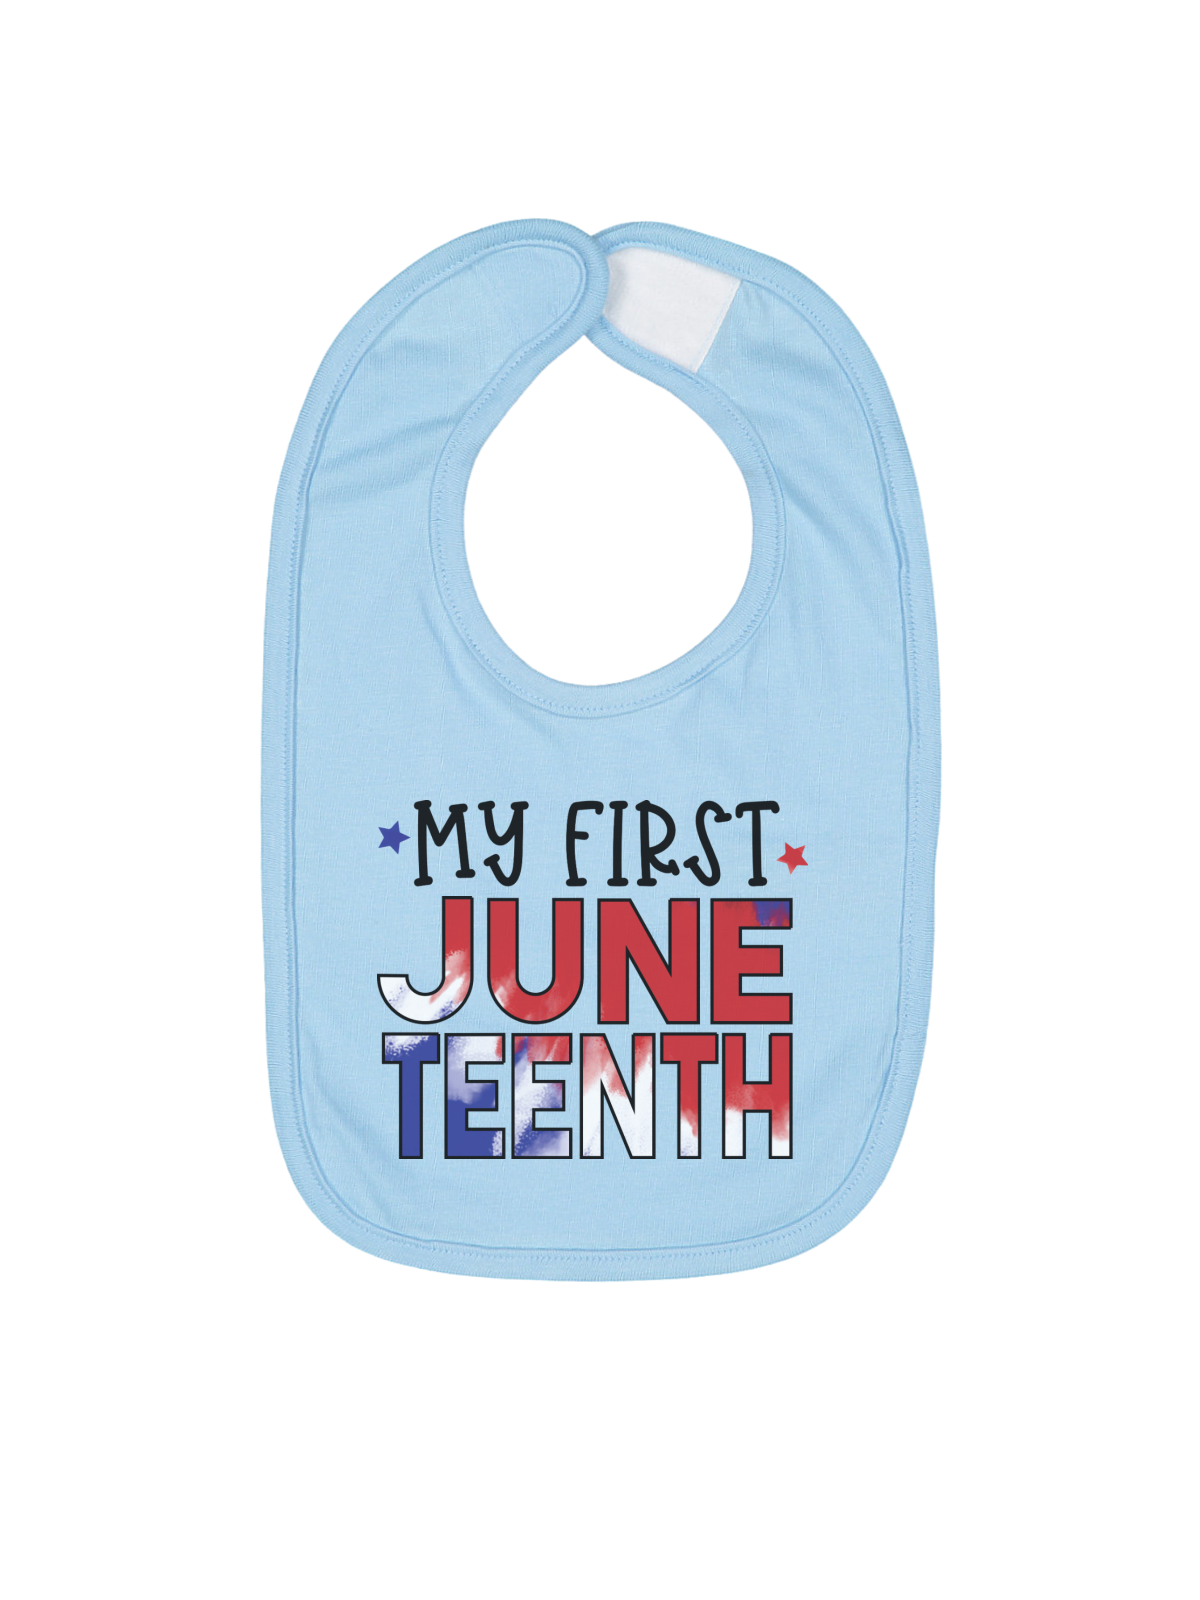 My First Juneteenth Infant Bib in Blue